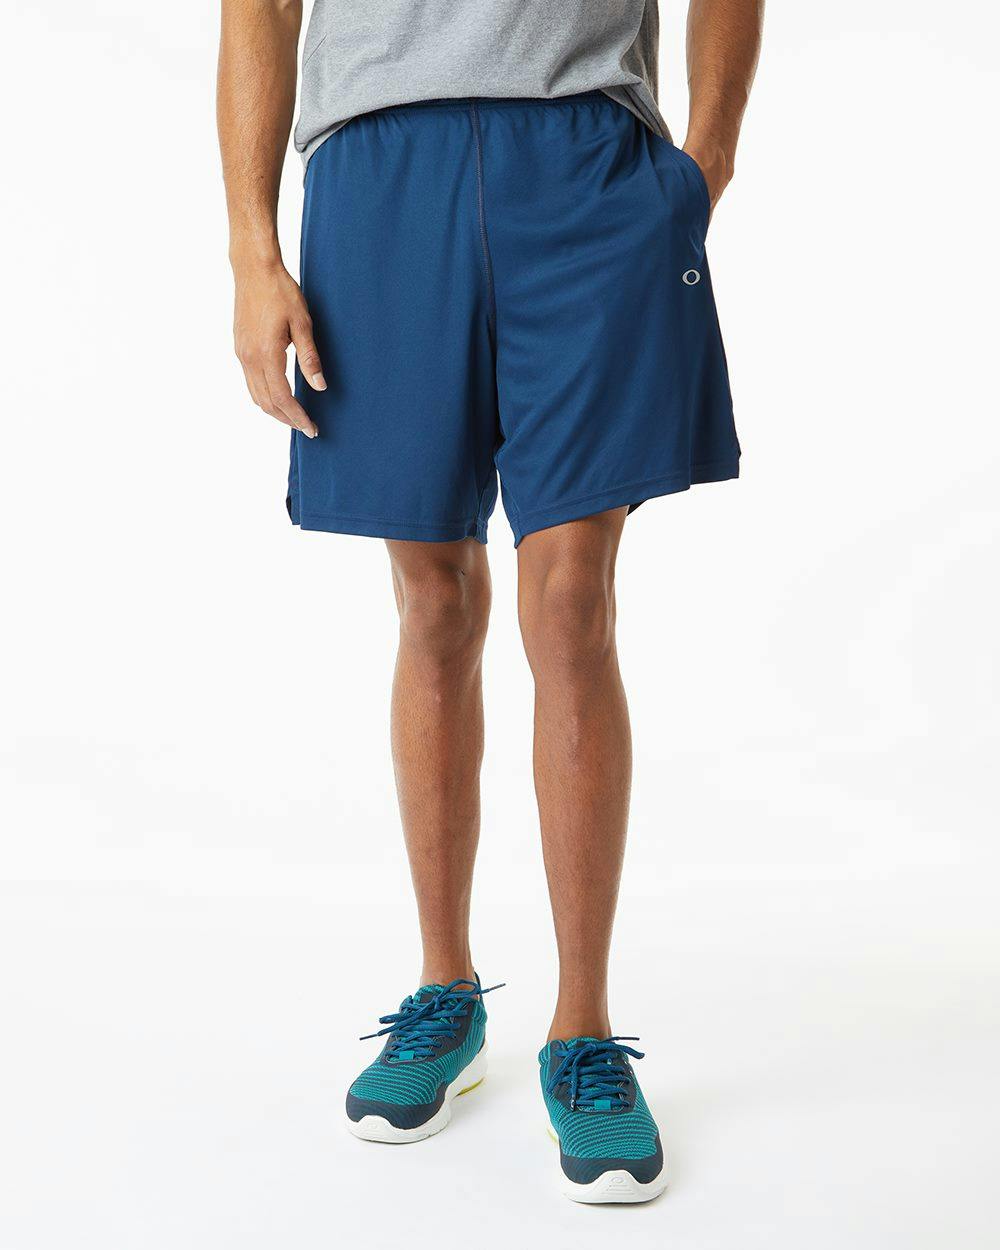 Image for Team Issue Hydrolix 7" Shorts with Drawcord - FOA405933